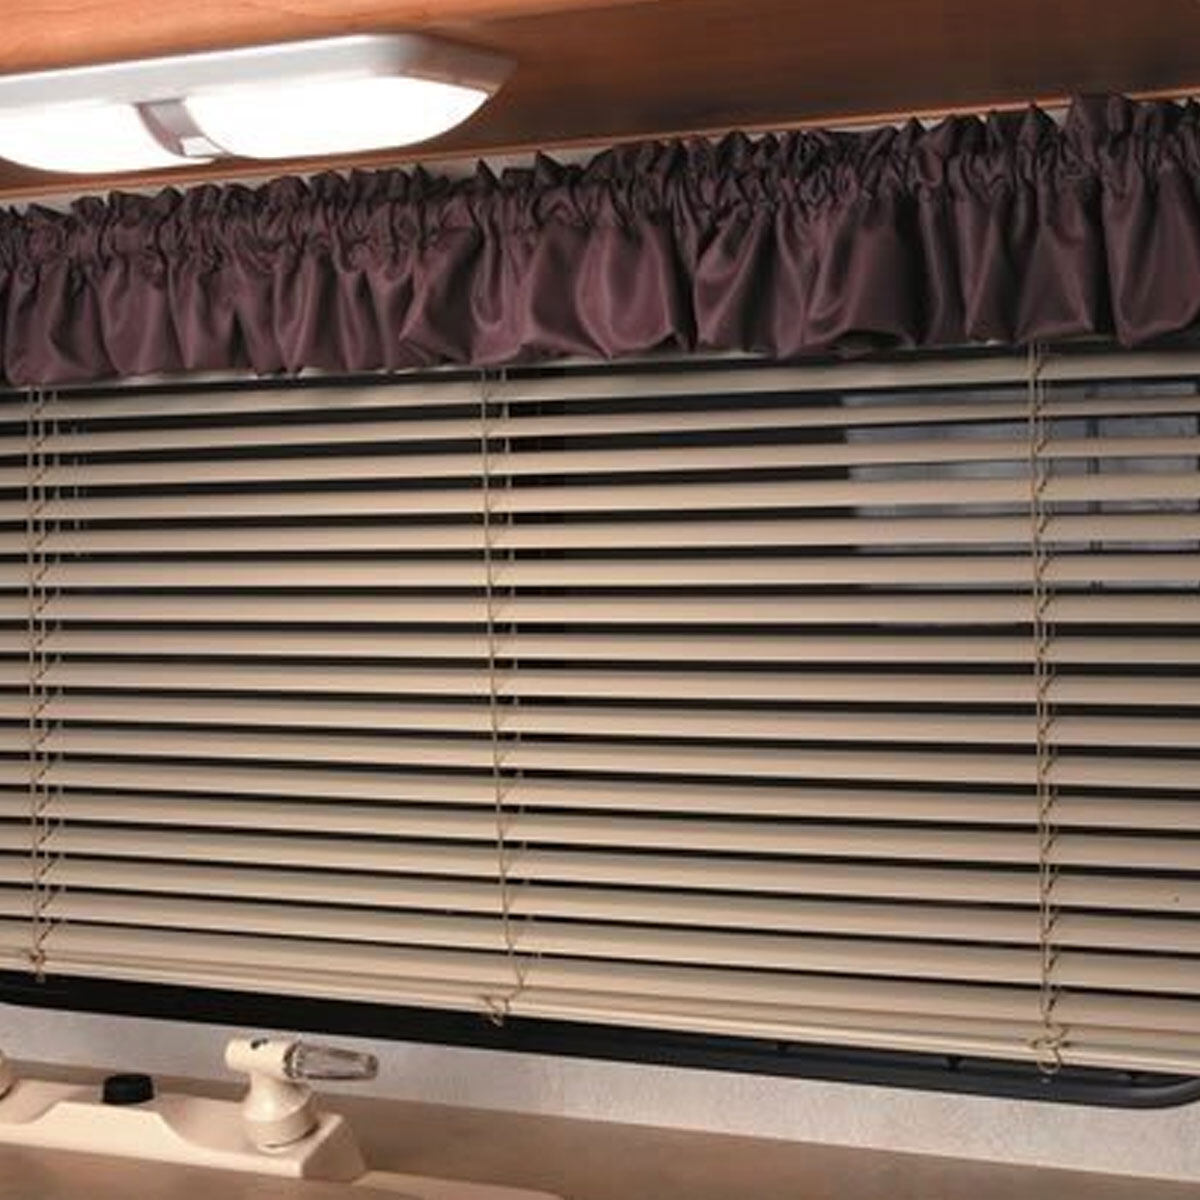 Motorized vs Manual RV Blinds: Pros and Cons